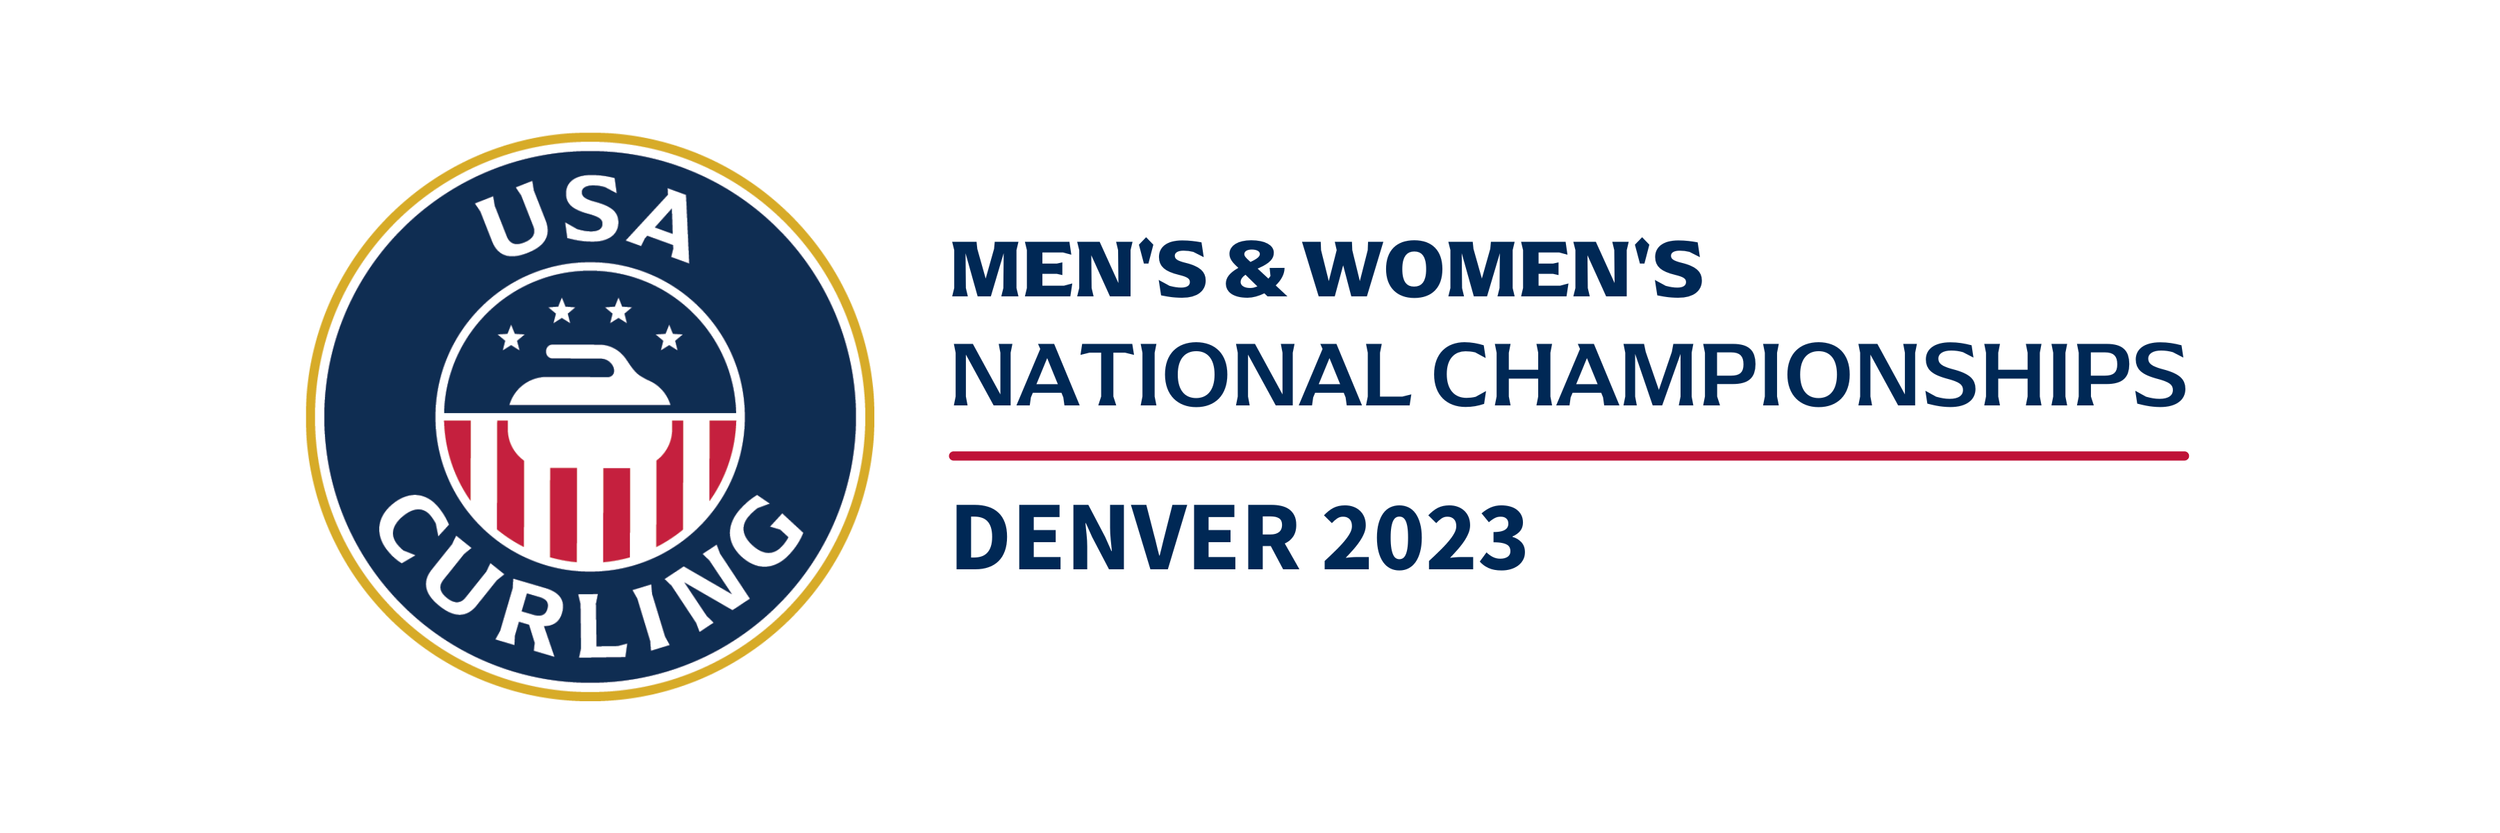 2023 MW Home — USA CURLING